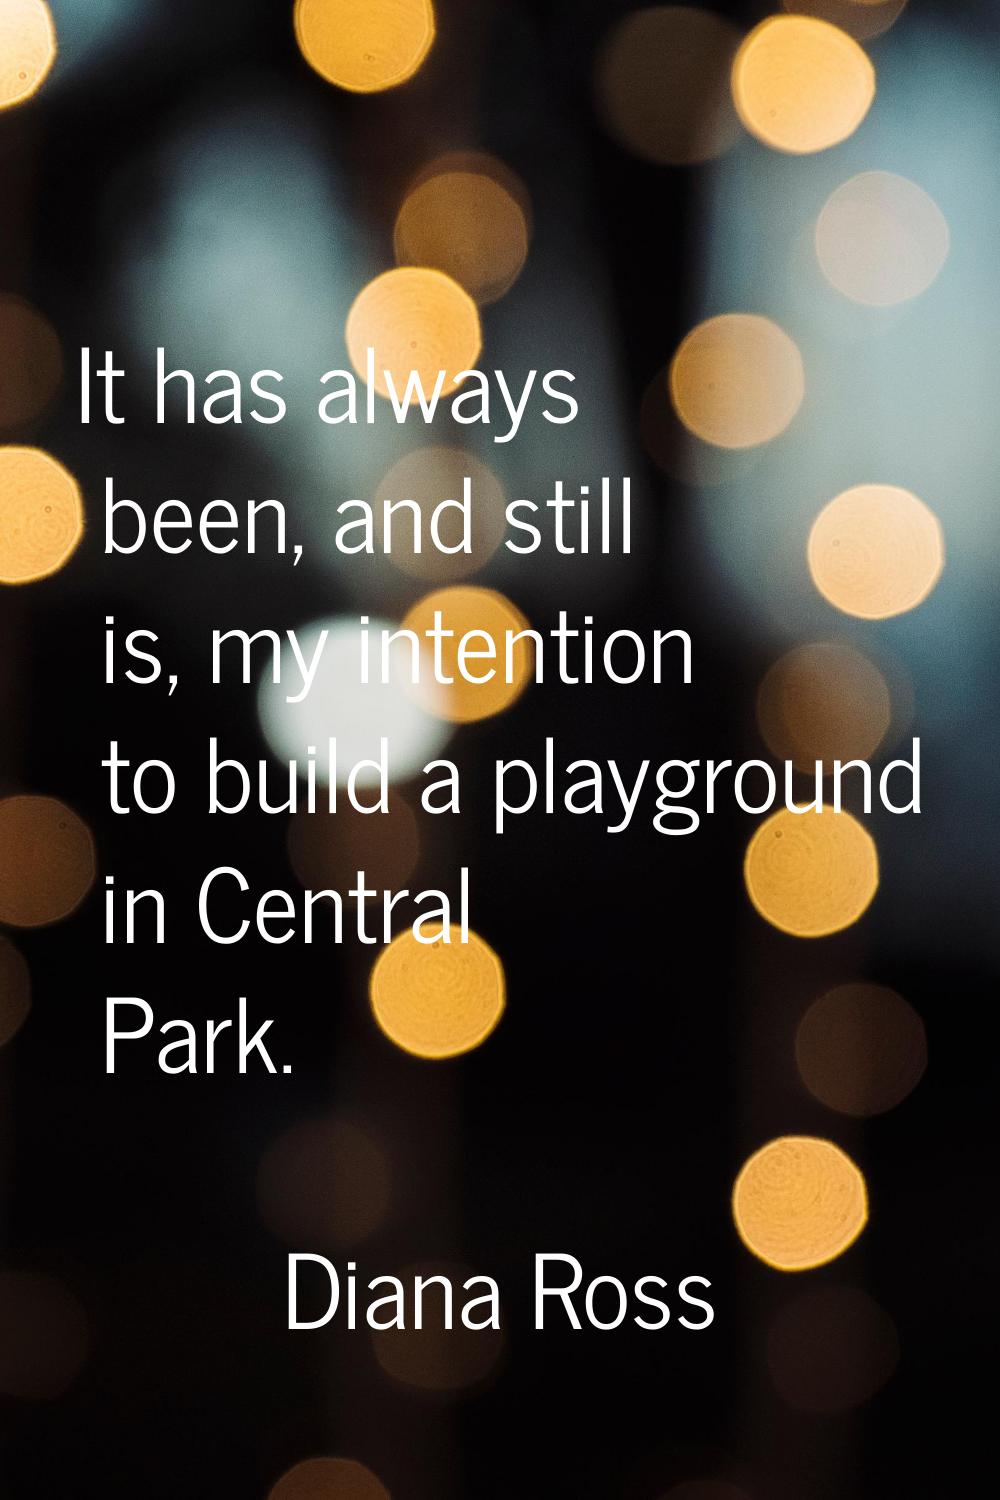 It has always been, and still is, my intention to build a playground in Central Park.